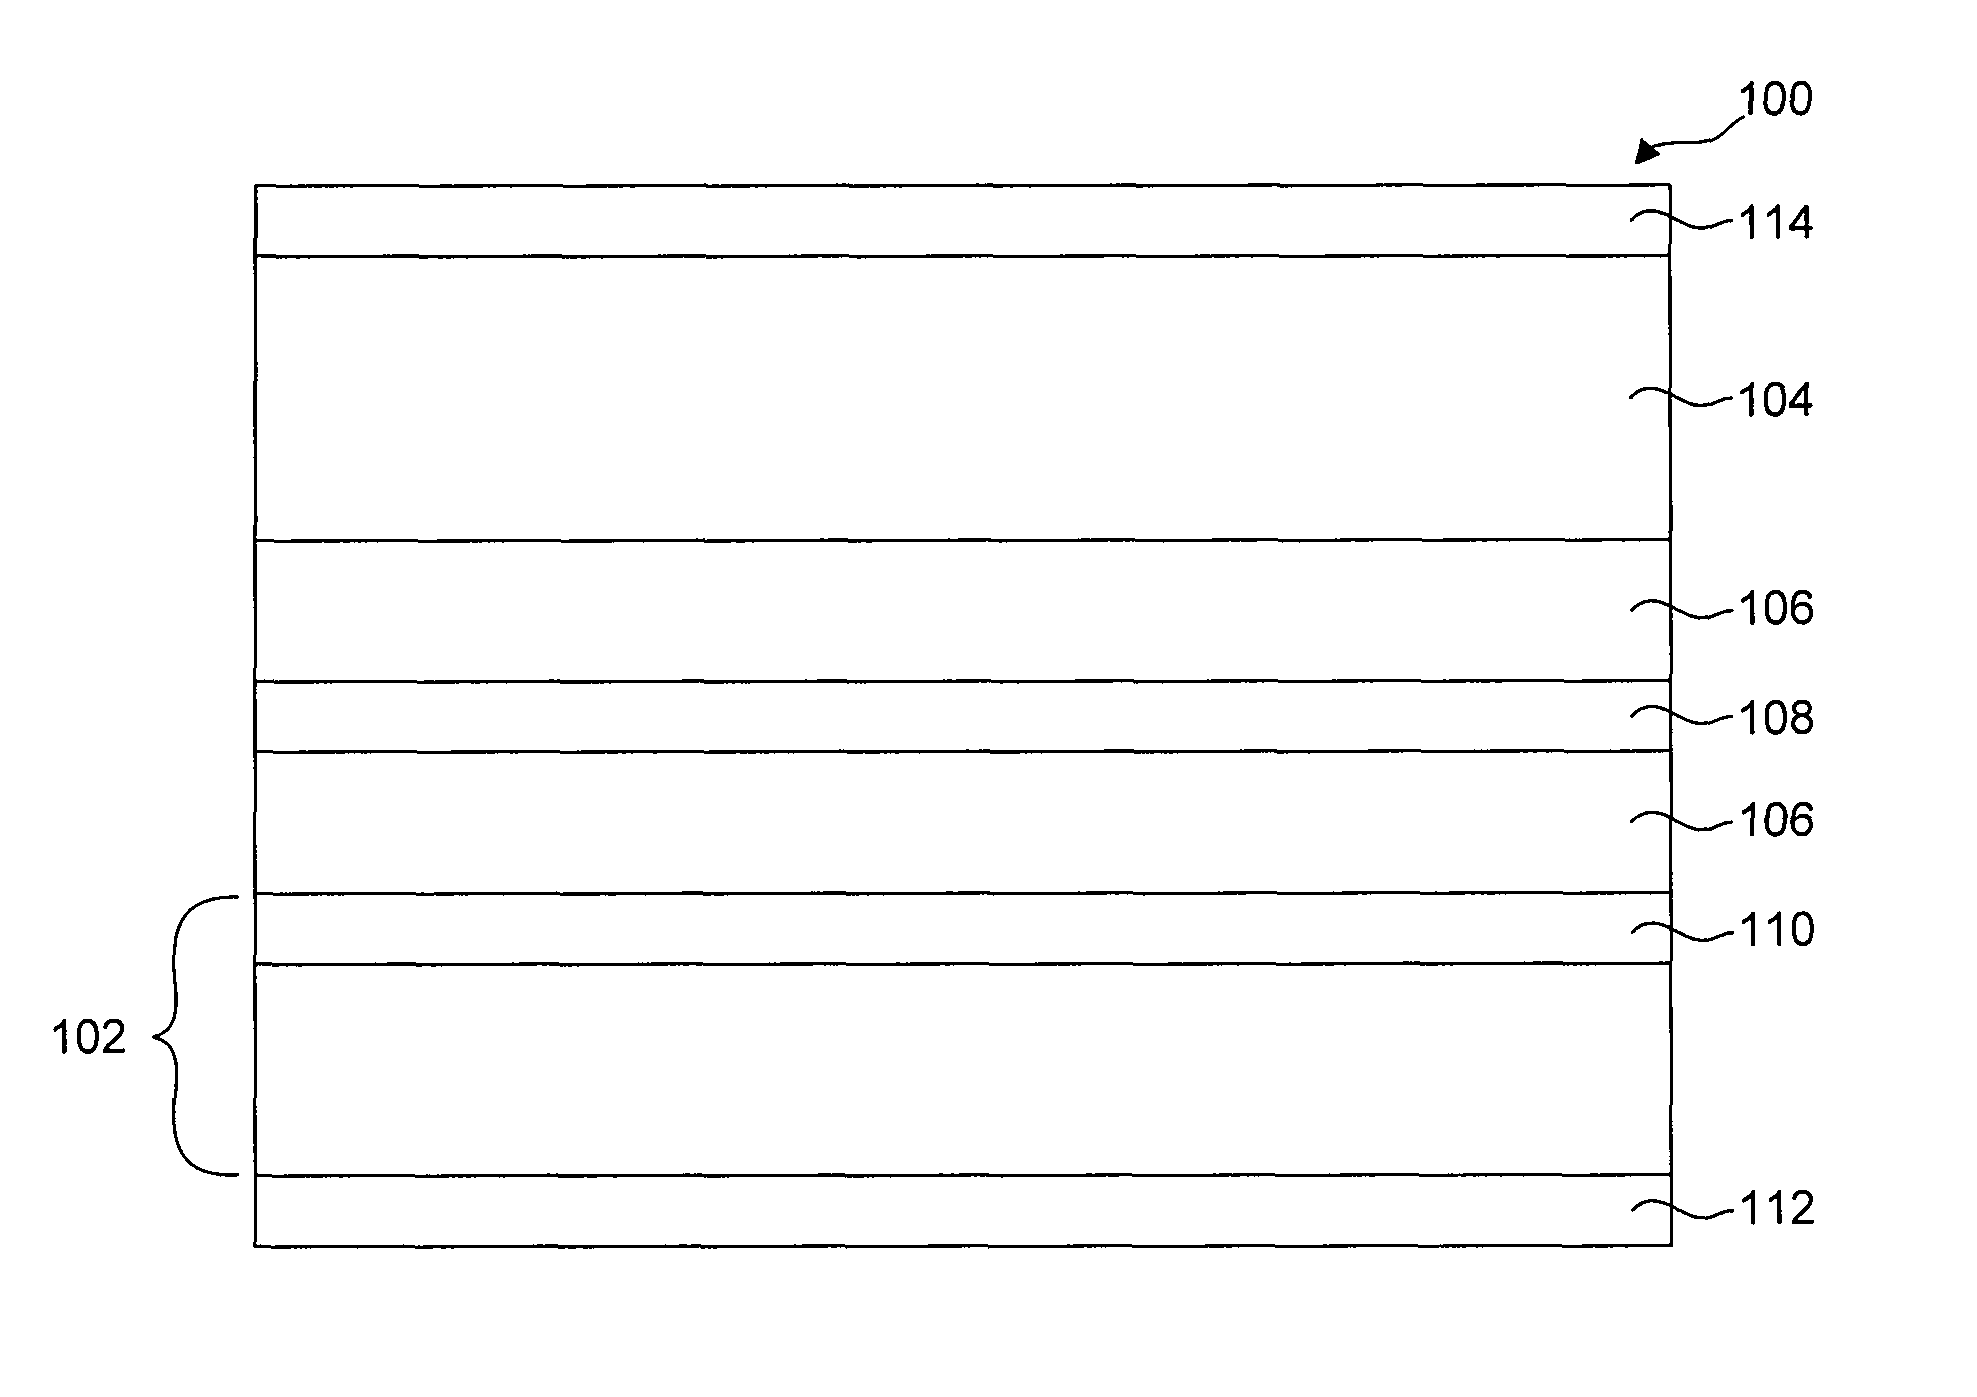 Lithium sulfur electrochemical cell including insoluble nitrogen-containing compound